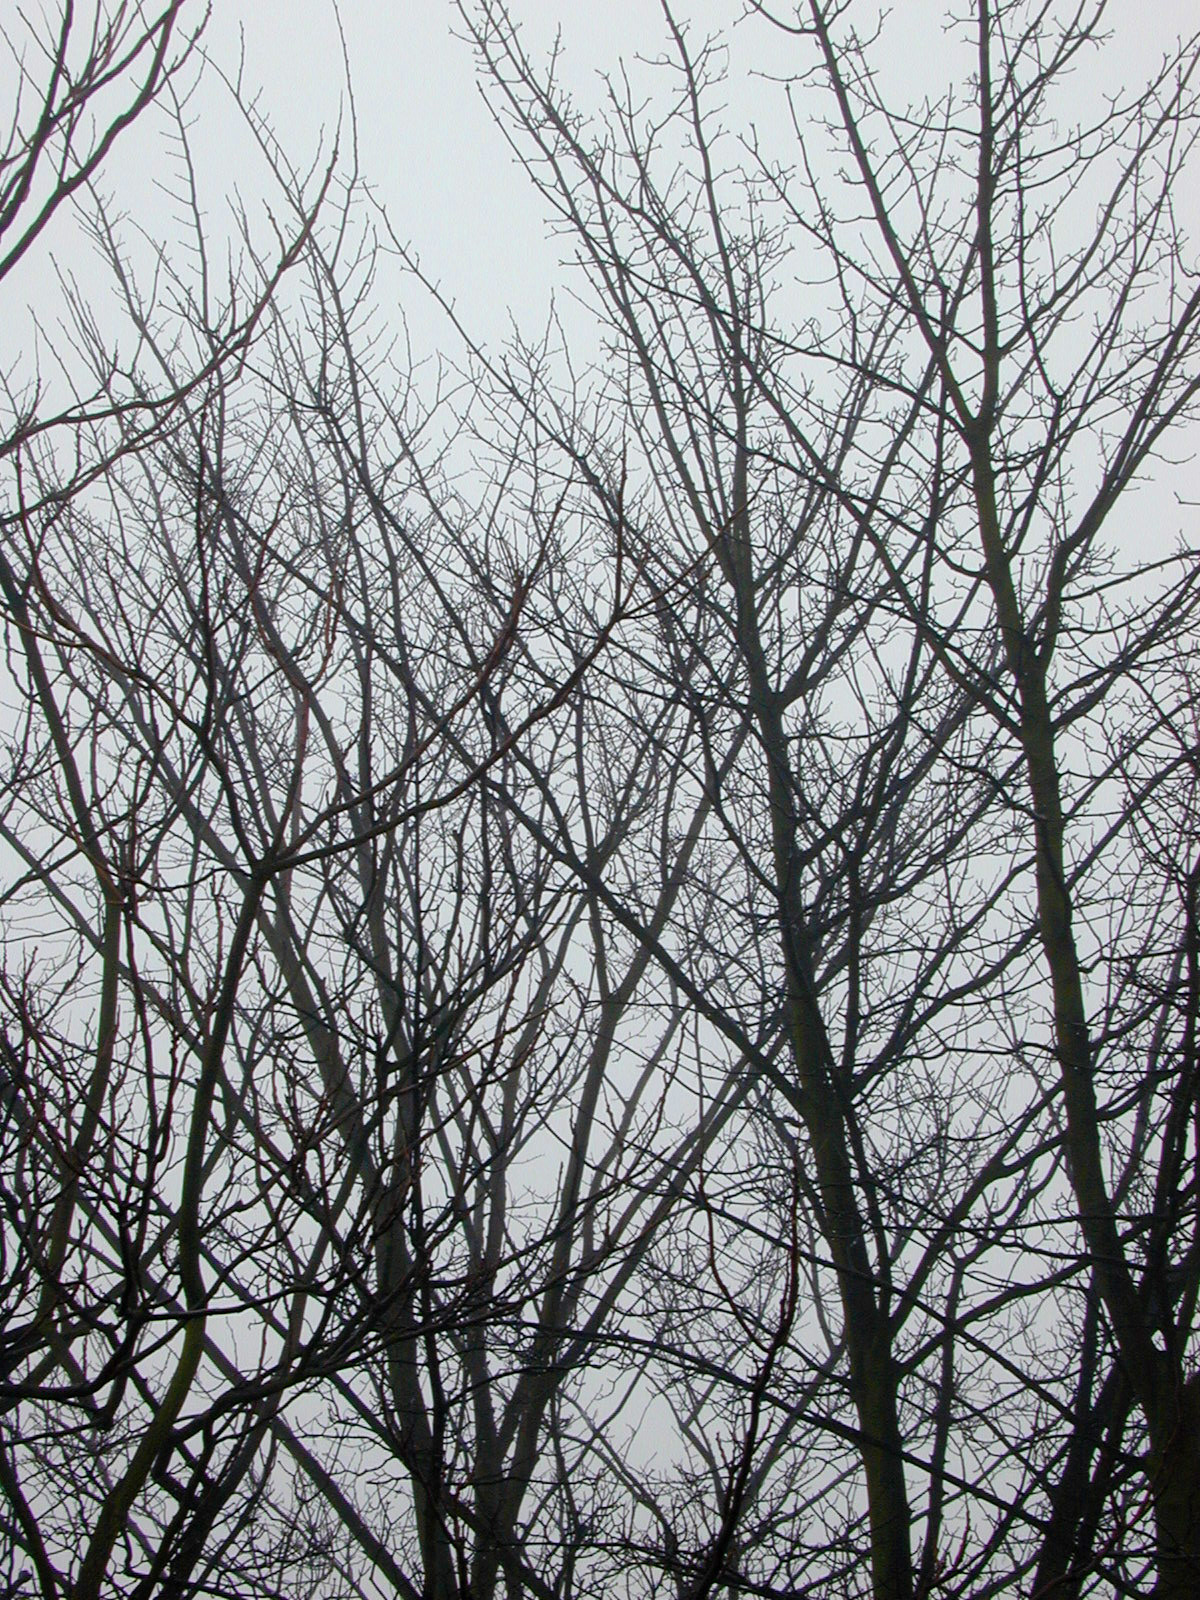 Free image of Bare tree branches against a dull grey sky